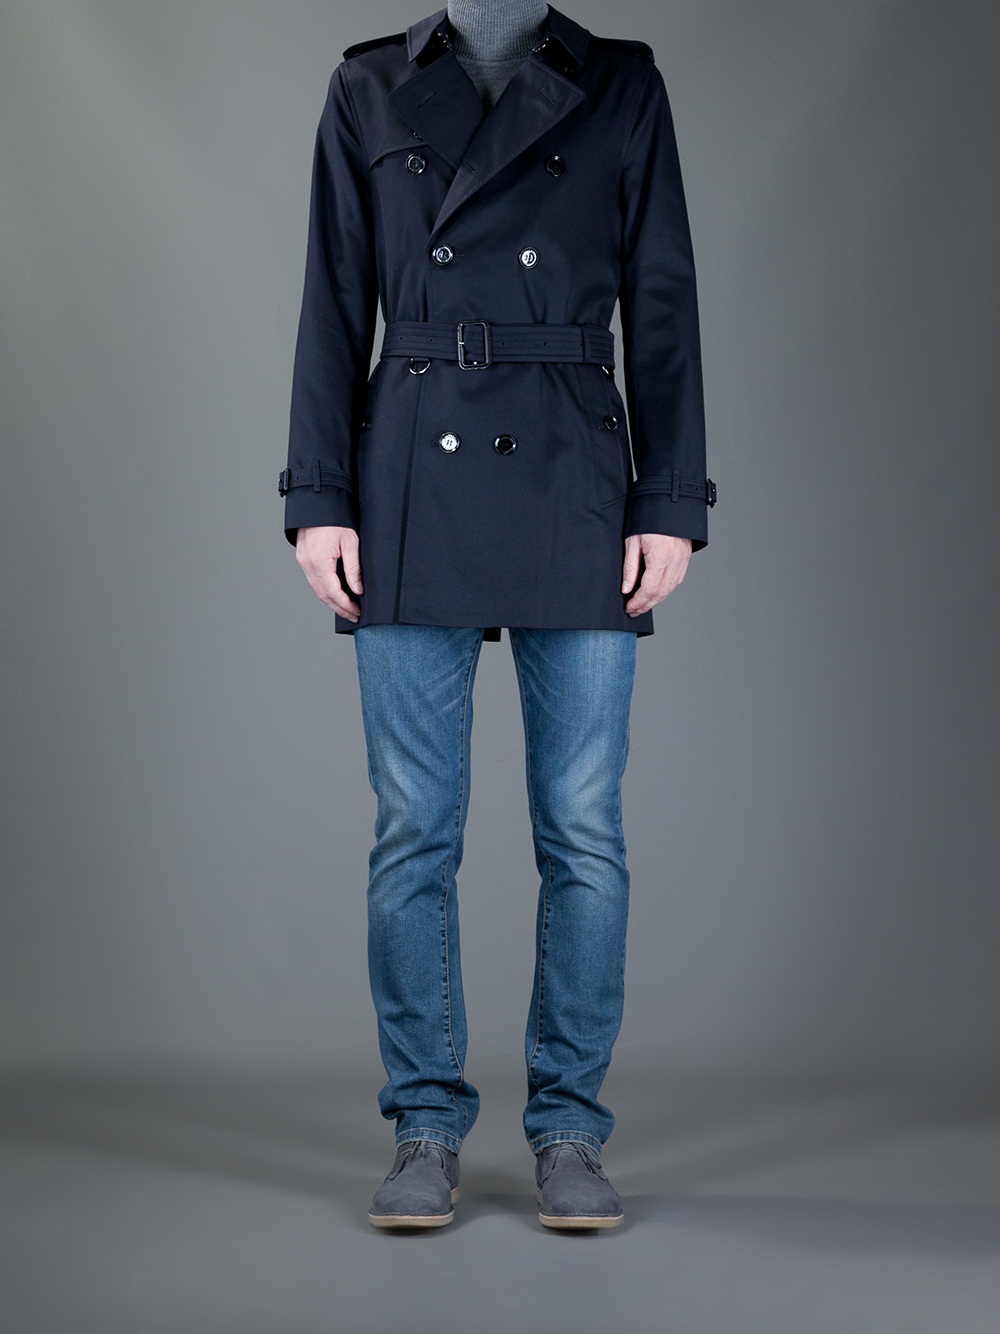 Burberry Britton Trenchcoat in Navy (Blue) for Men - Lyst